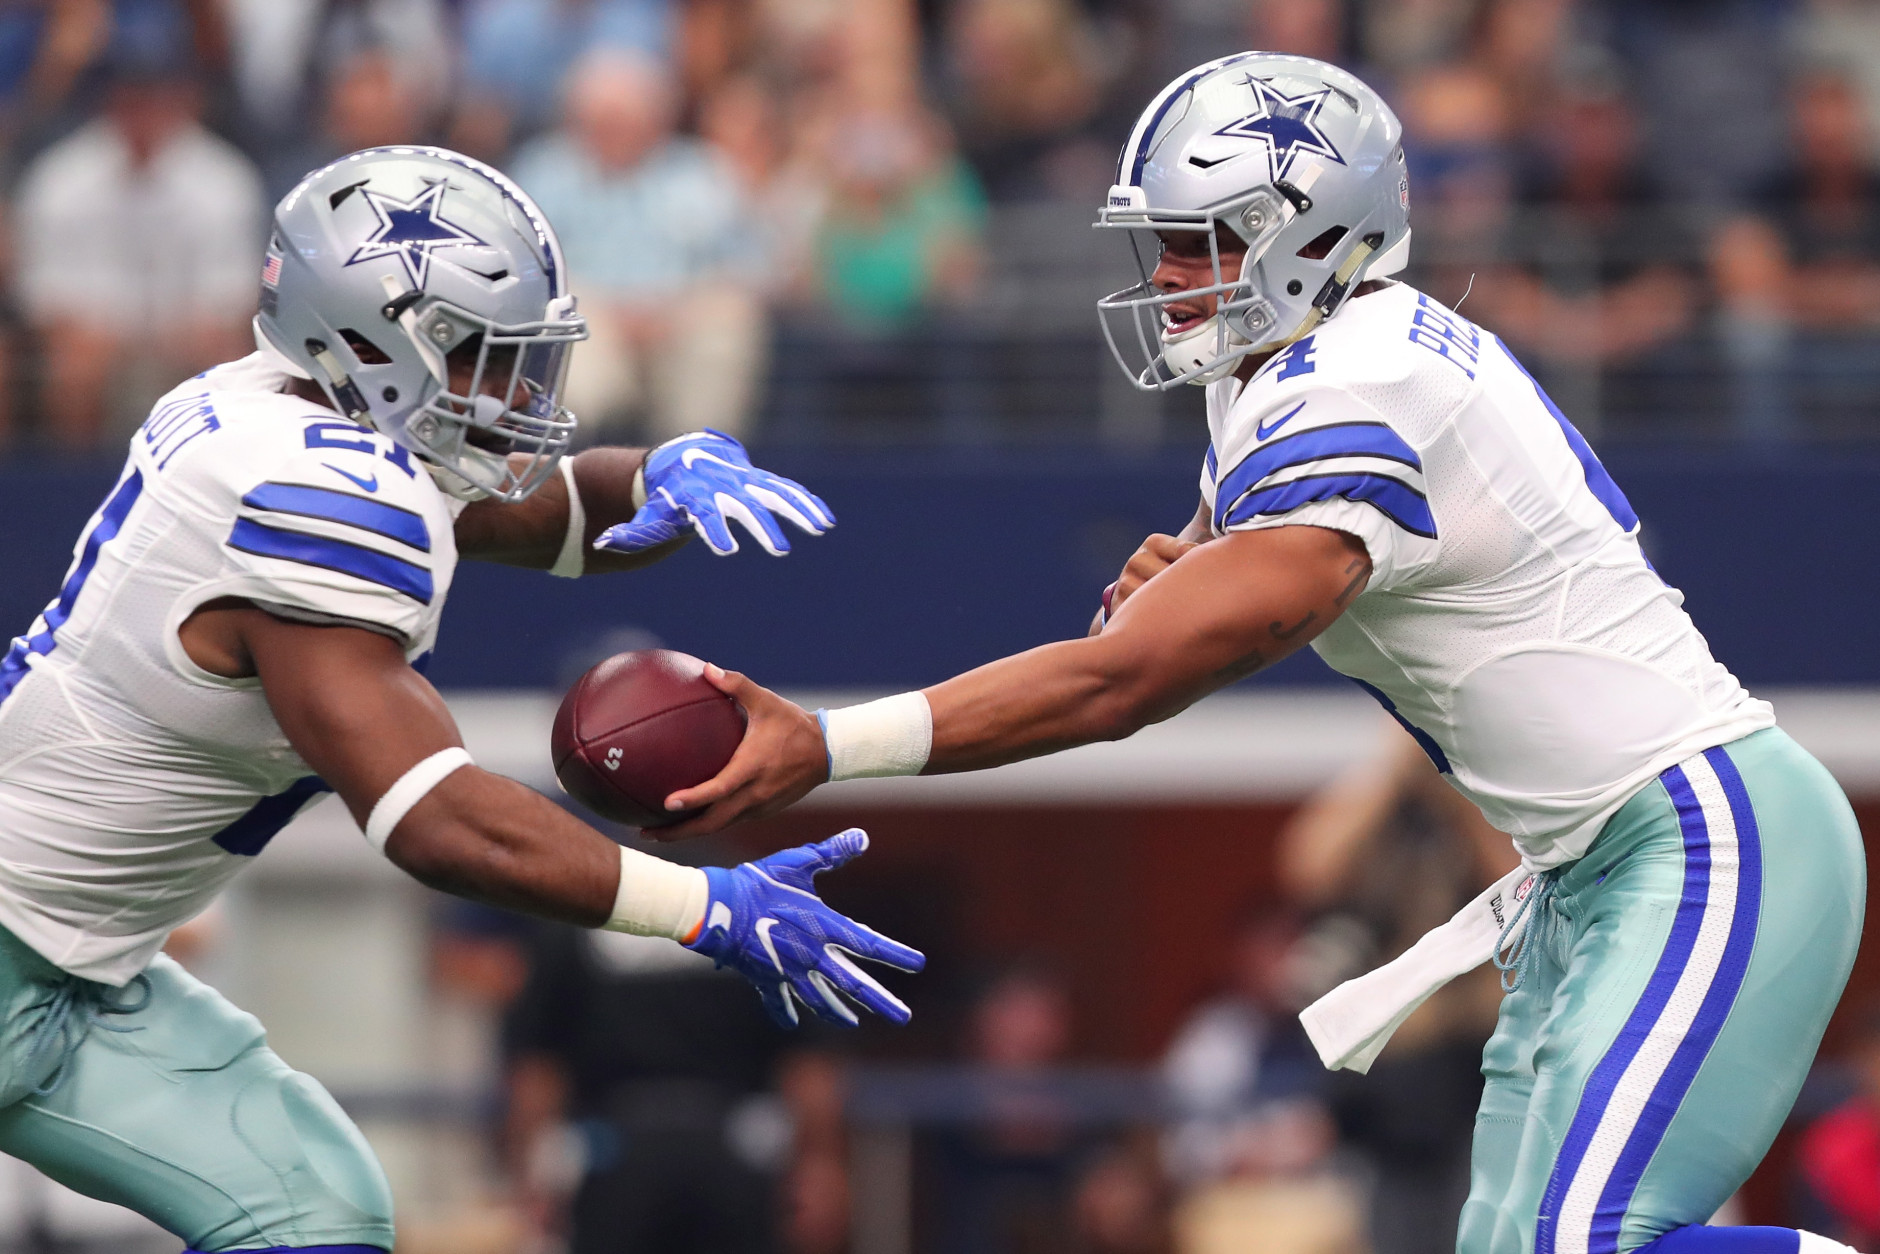 ARLINGTON, TX - SEPTEMBER 11:  Dak Prescott #4 hands the ball to Ezekiel Elliott #21 of the Dallas Cowboys during the first quarter against the New York Giants at AT&amp;T Stadium on September 11, 2016 in Arlington, Texas.  (Photo by Tom Pennington/Getty Images)